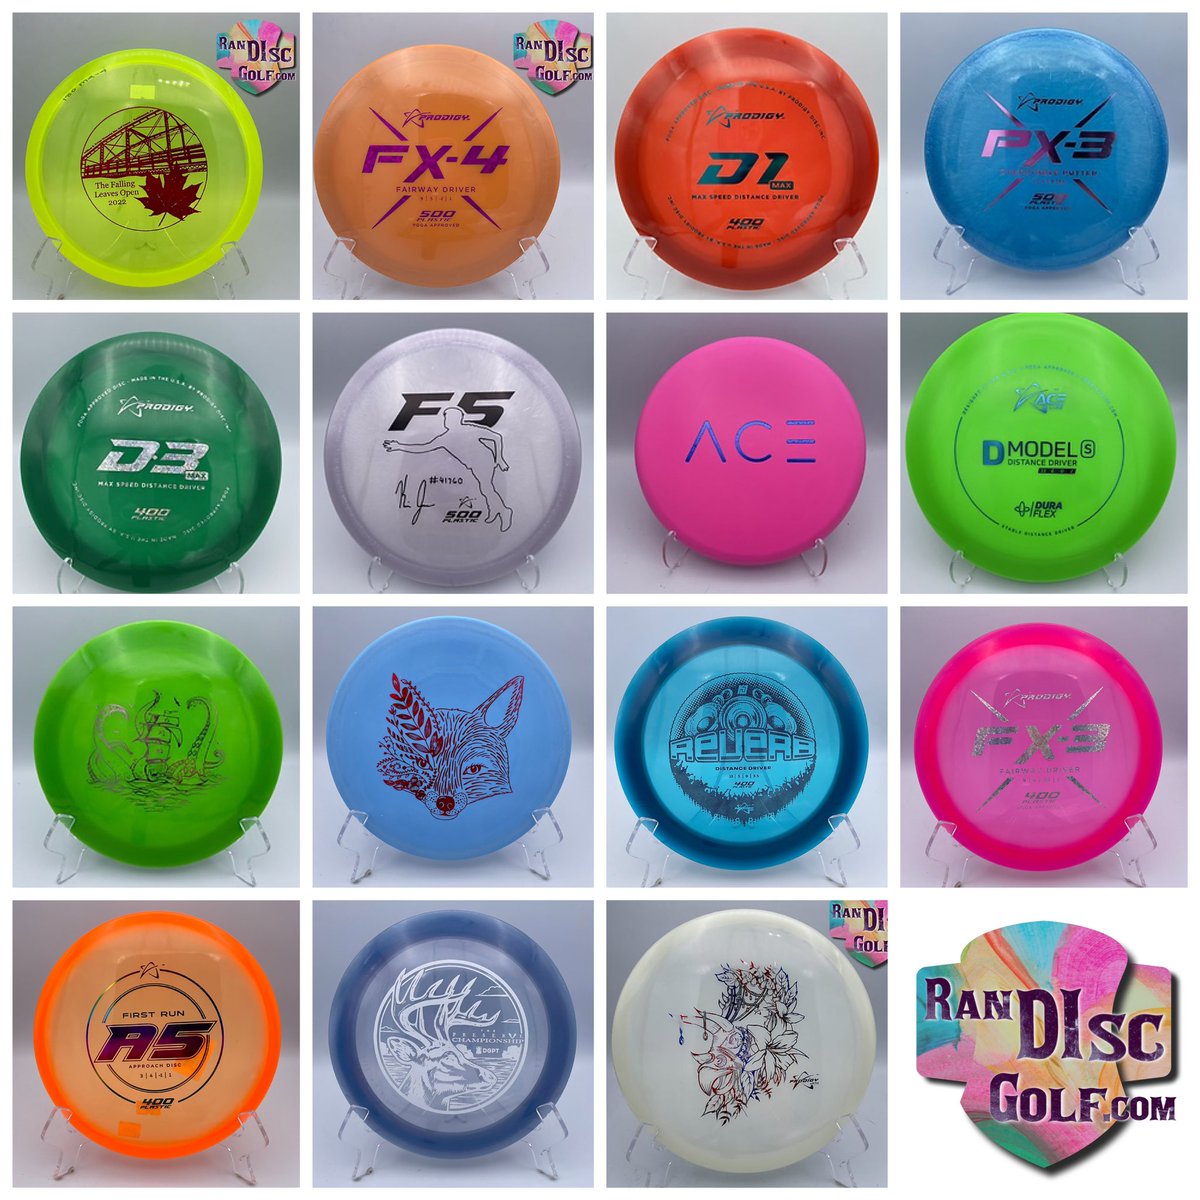 Massive Price CUTS on all Prodigy in stock!!! And, yes, they are MASSIVE. Some under $10, LOTS under $15! None over $19!!! All plastics and all molds have been reduced! #prodigy #discounts #dealsdealsdeals #discgolf #frisbeegolf